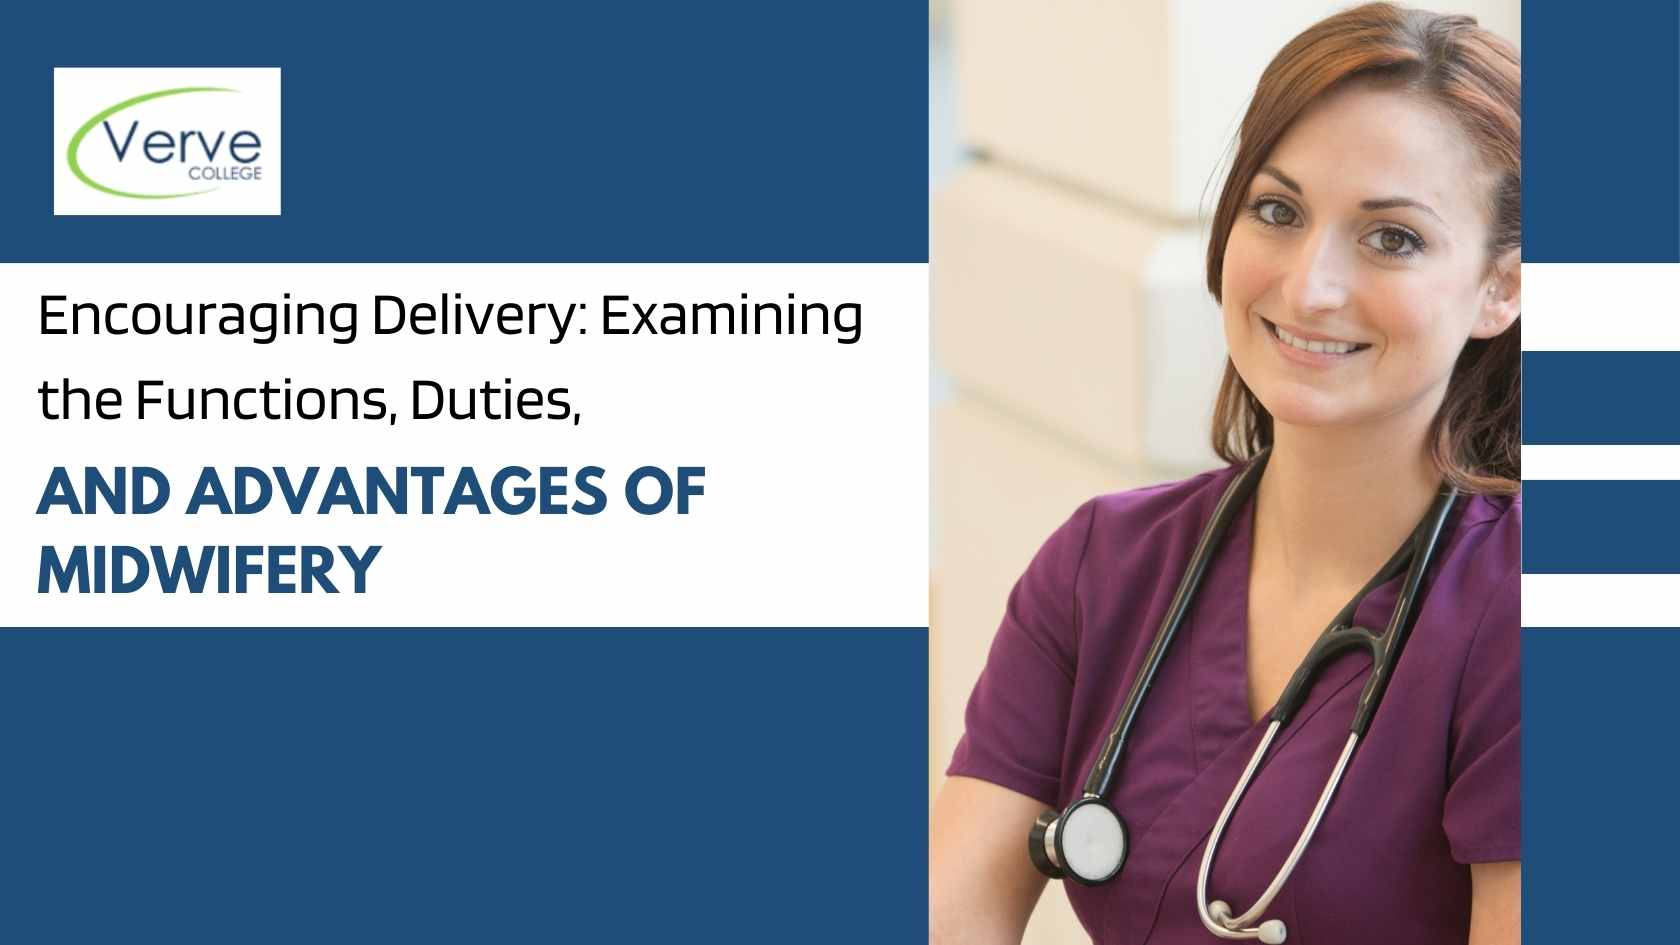 Encouraging Delivery: Examining the Functions, Duties, and Advantages of Midwifery